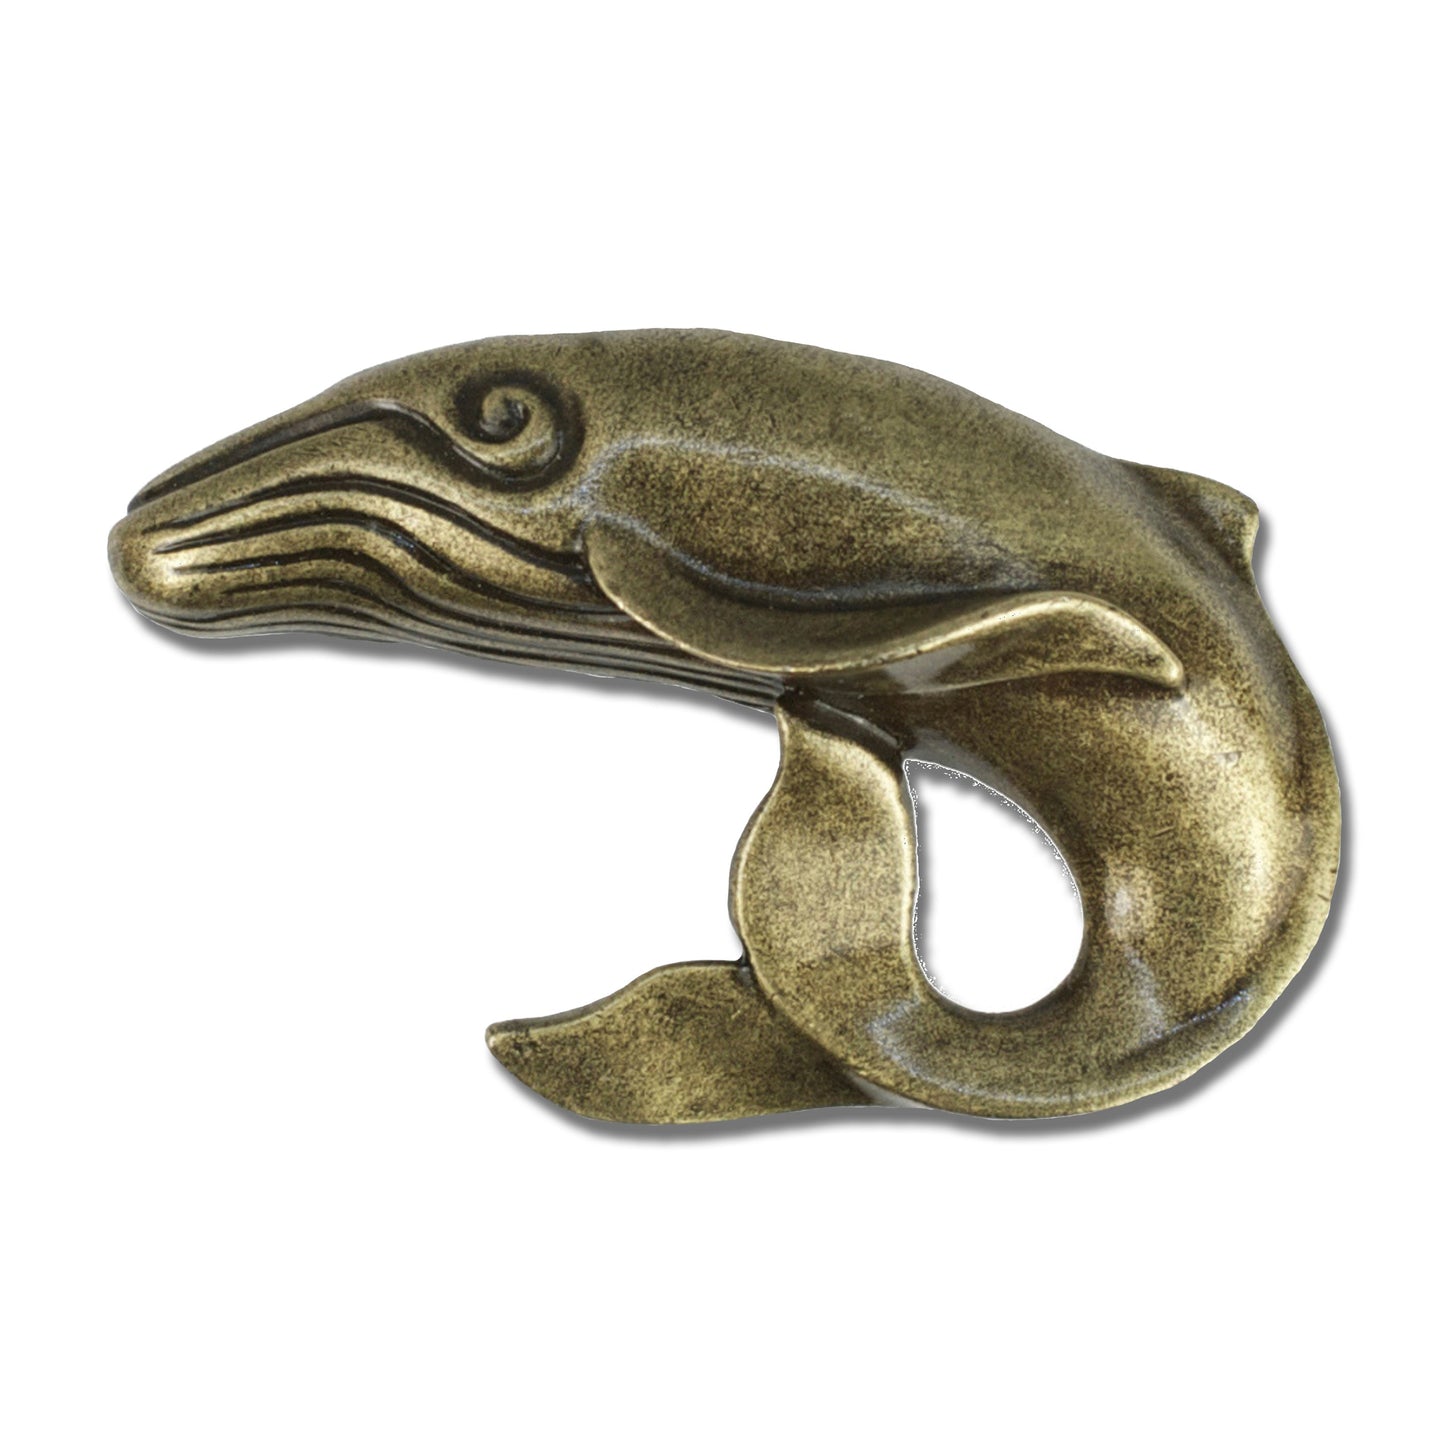 Whale Drawer Pulls and Knobs- Whale Handle, Nautical Pull, Coastal Drawer Pull, Sea Life Cabinet Knob, Ocean Drawer Pulls, Nickel and Brass Whale Knob - The Tool Store